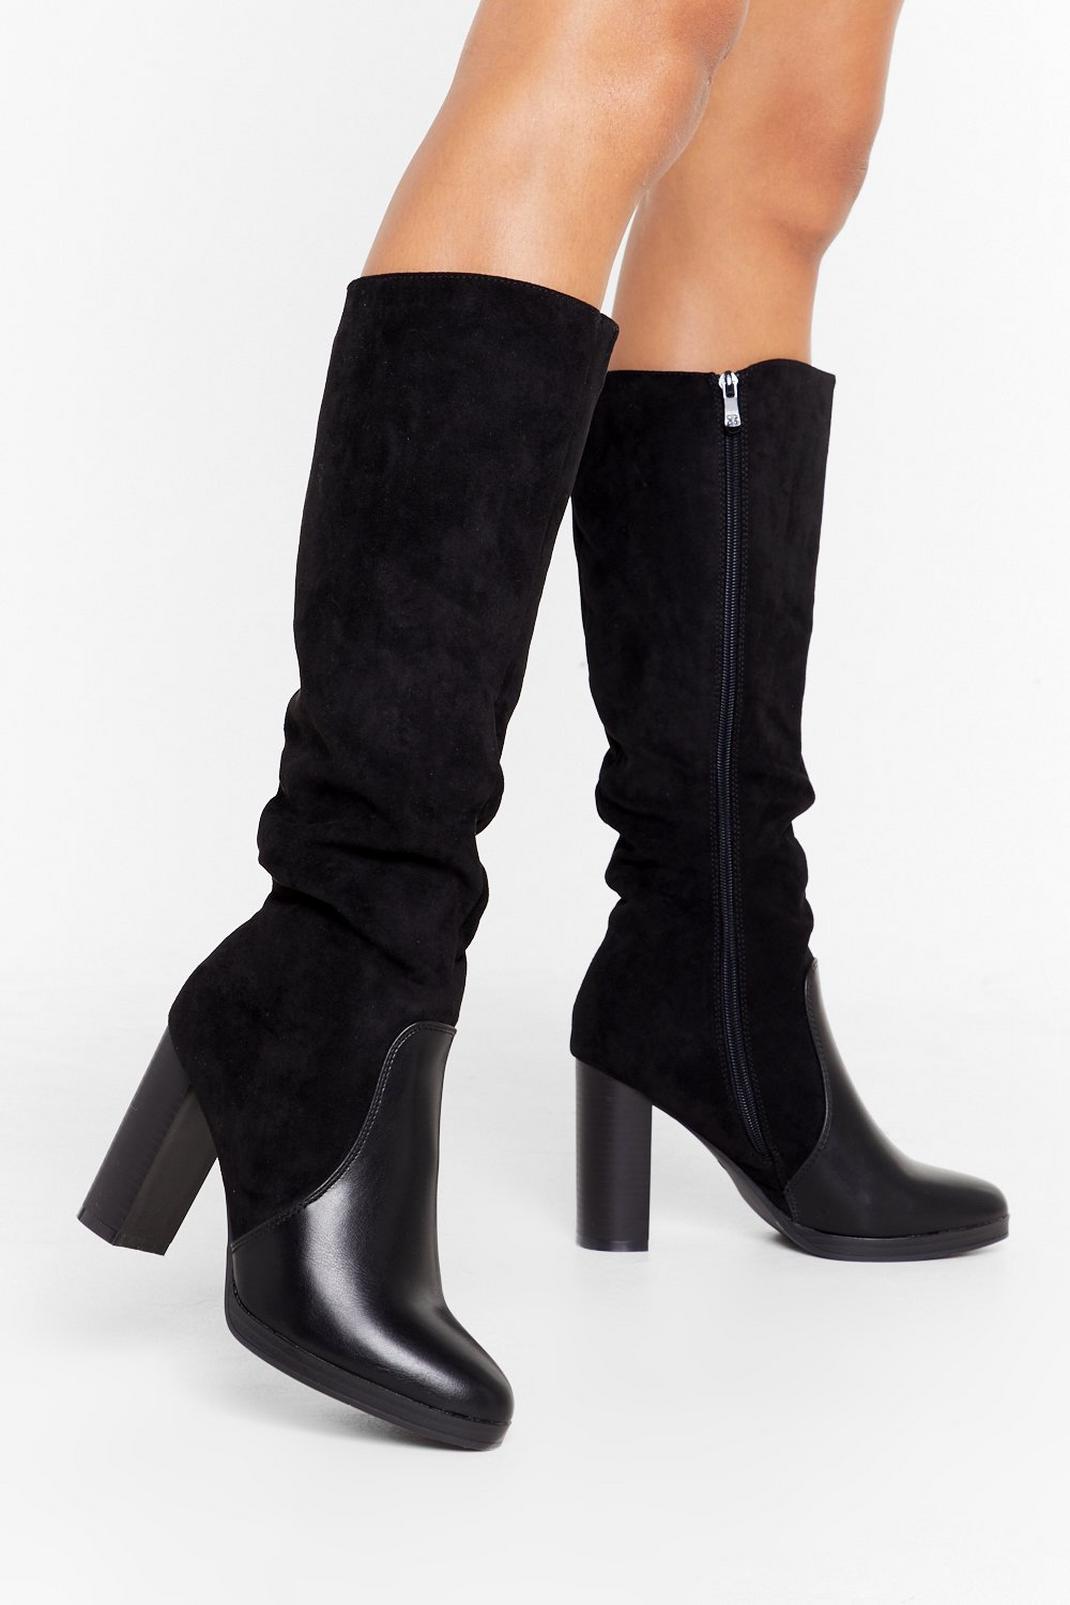 Opposites Attract Two-Tone Knee-High Boots | Nasty Gal